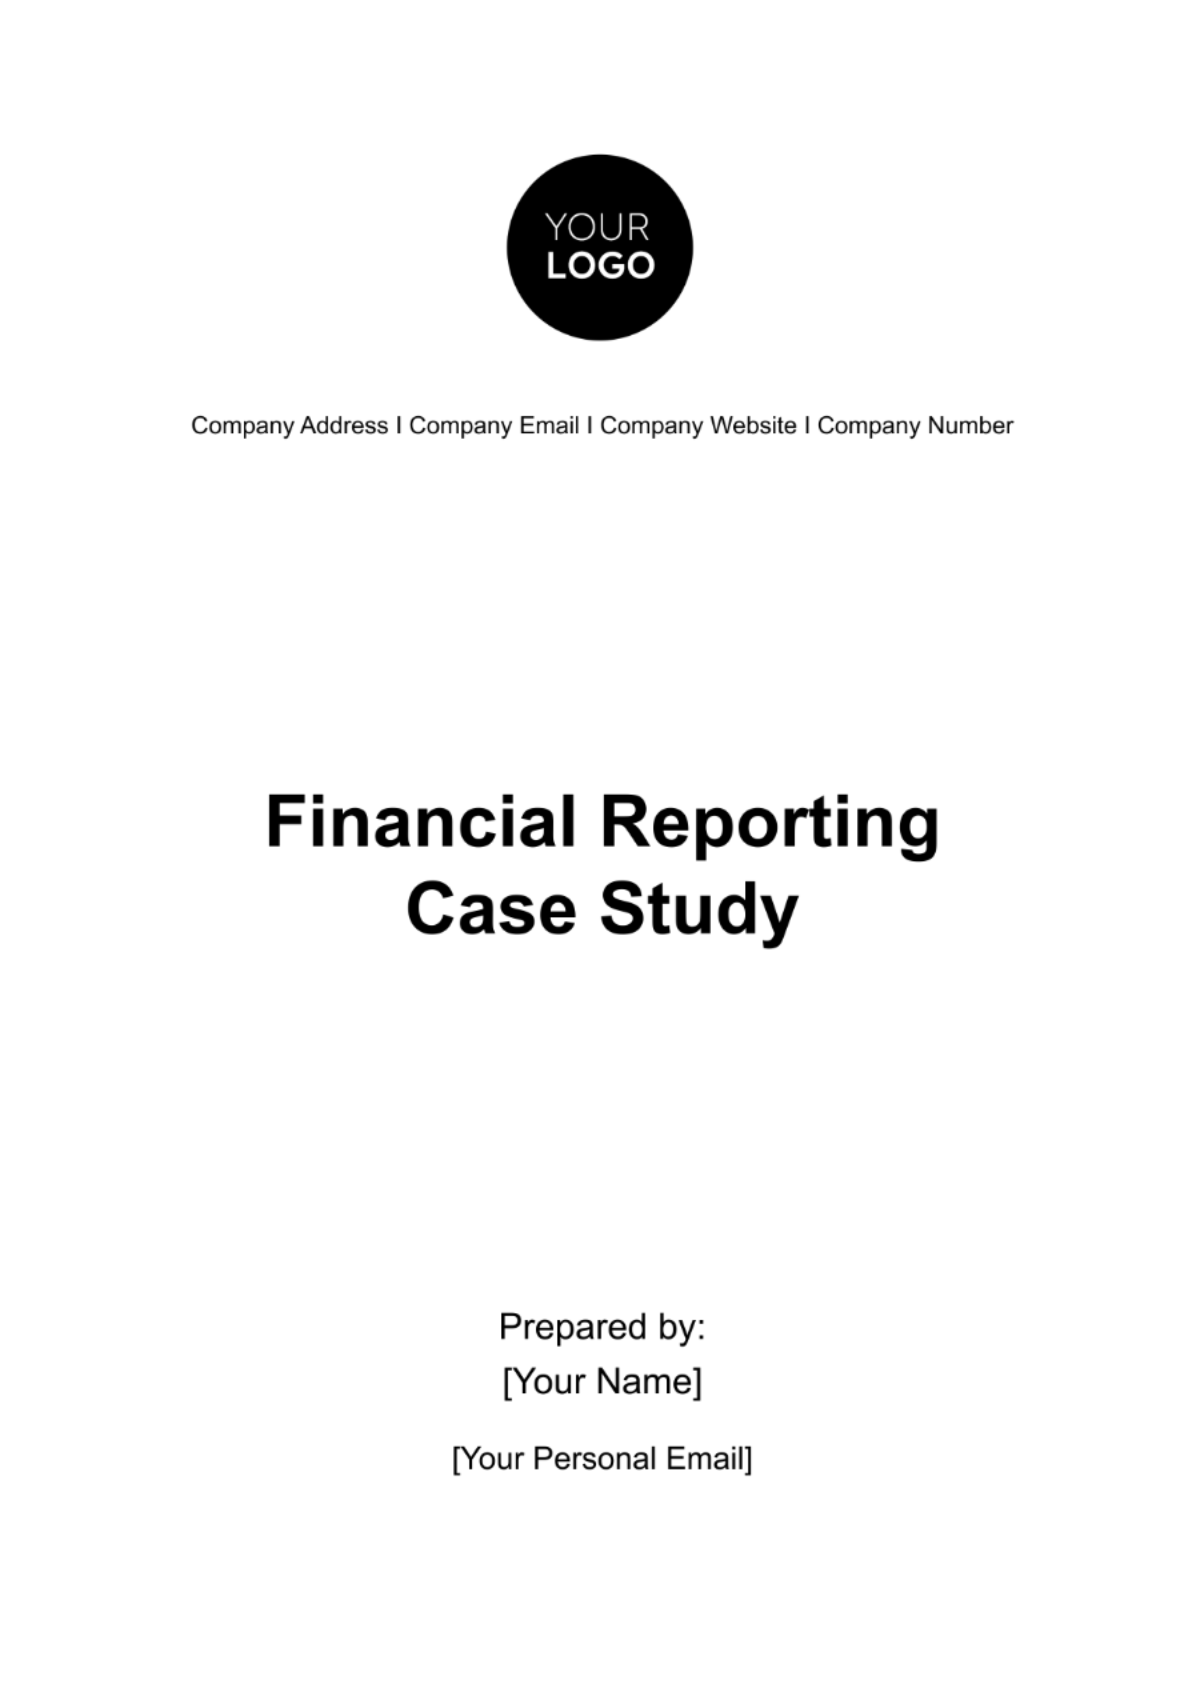 Financial Reporting Case Study Template